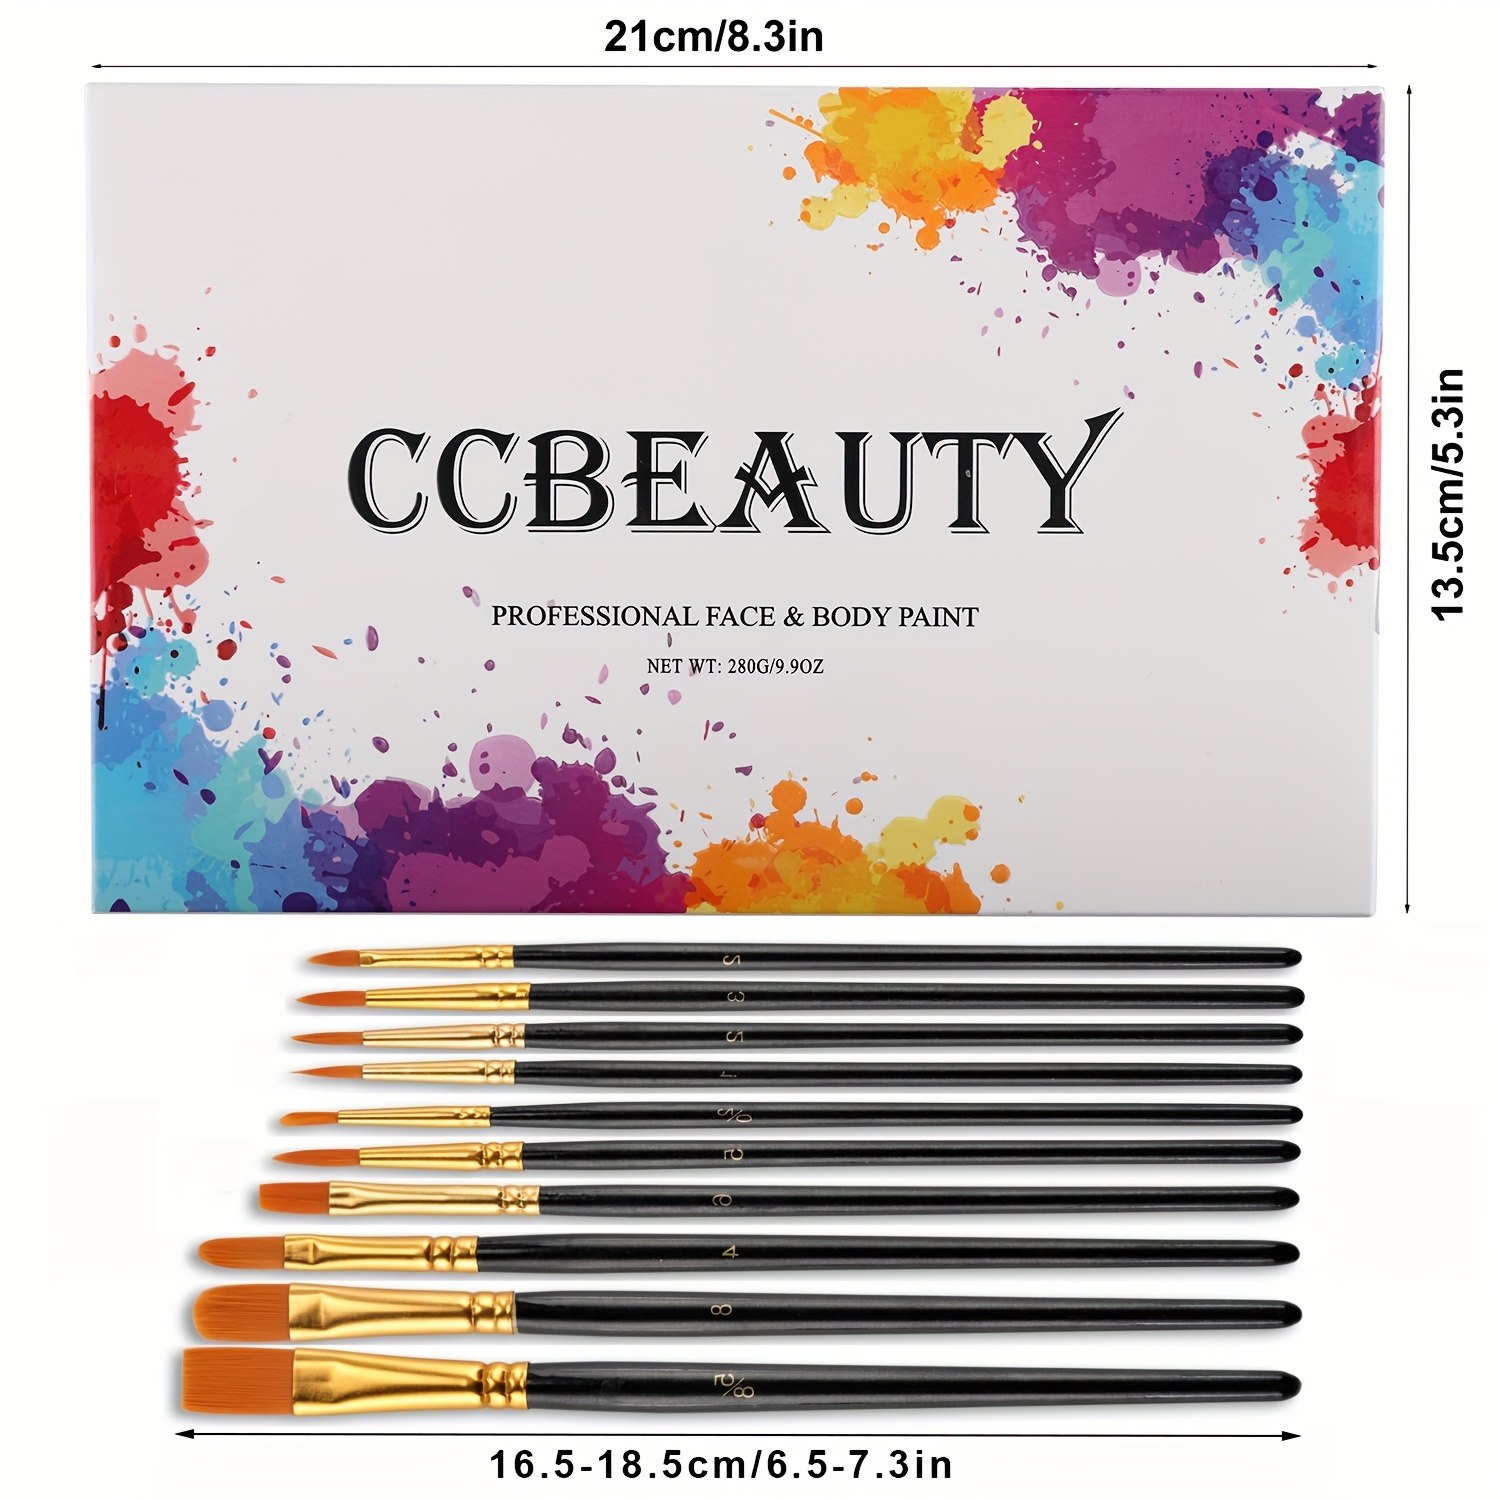 CCbeauty 22 Colors Face Paint Palette,Oil Based Face Painting Kit,Non Toxic  SFX Makeup For Halloween Costume Cosplay Makeup,Professional FX Body